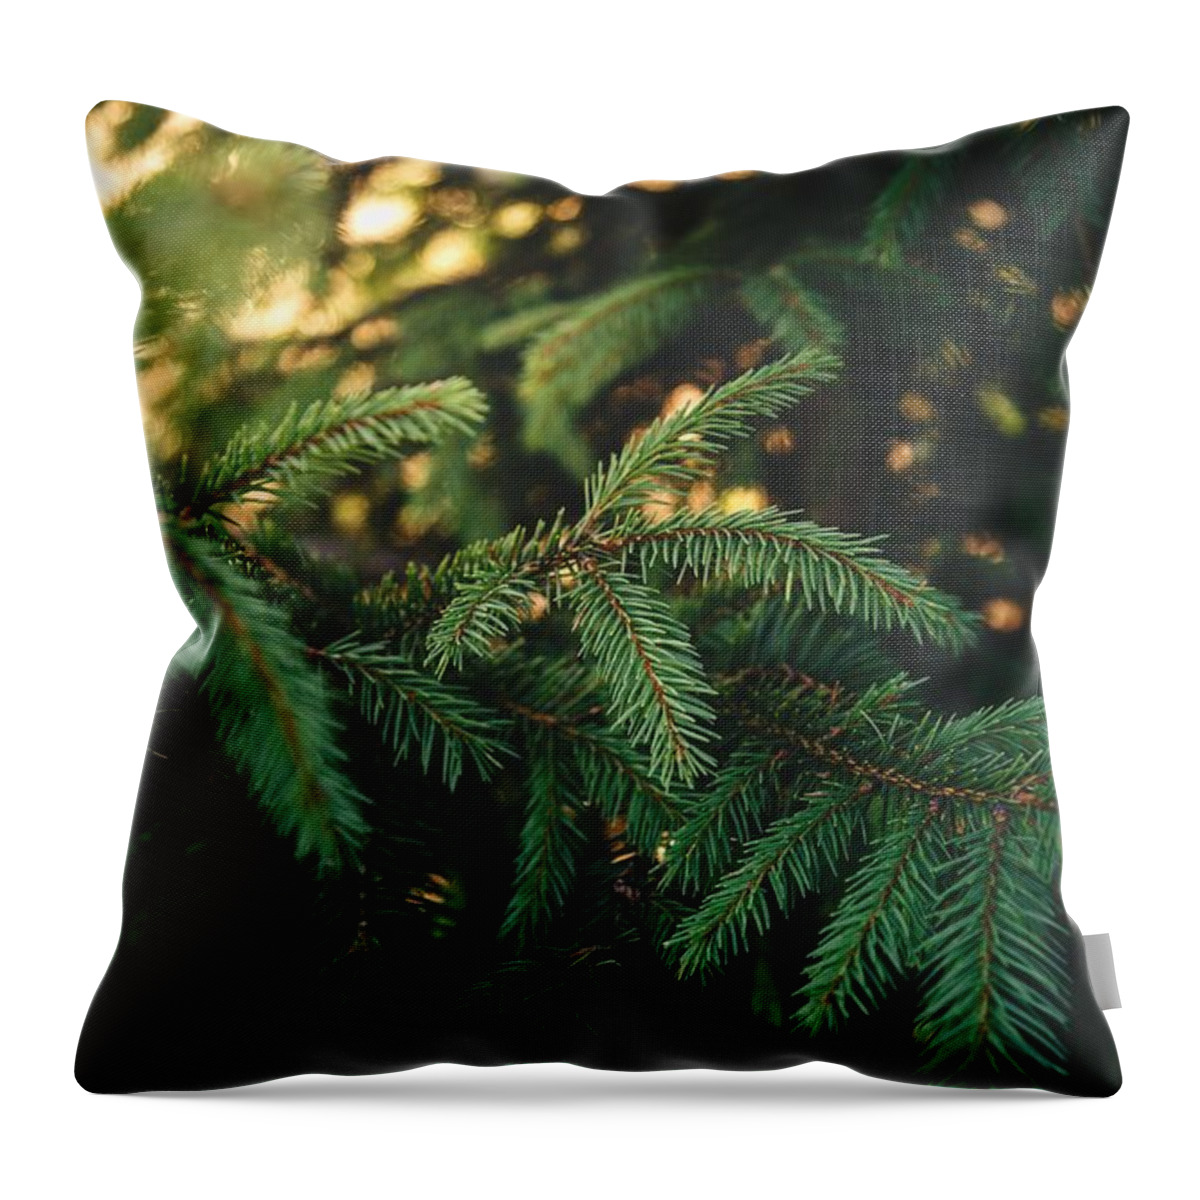 Pine Tree Throw Pillow featuring the digital art Pine Tree by Super Lovely